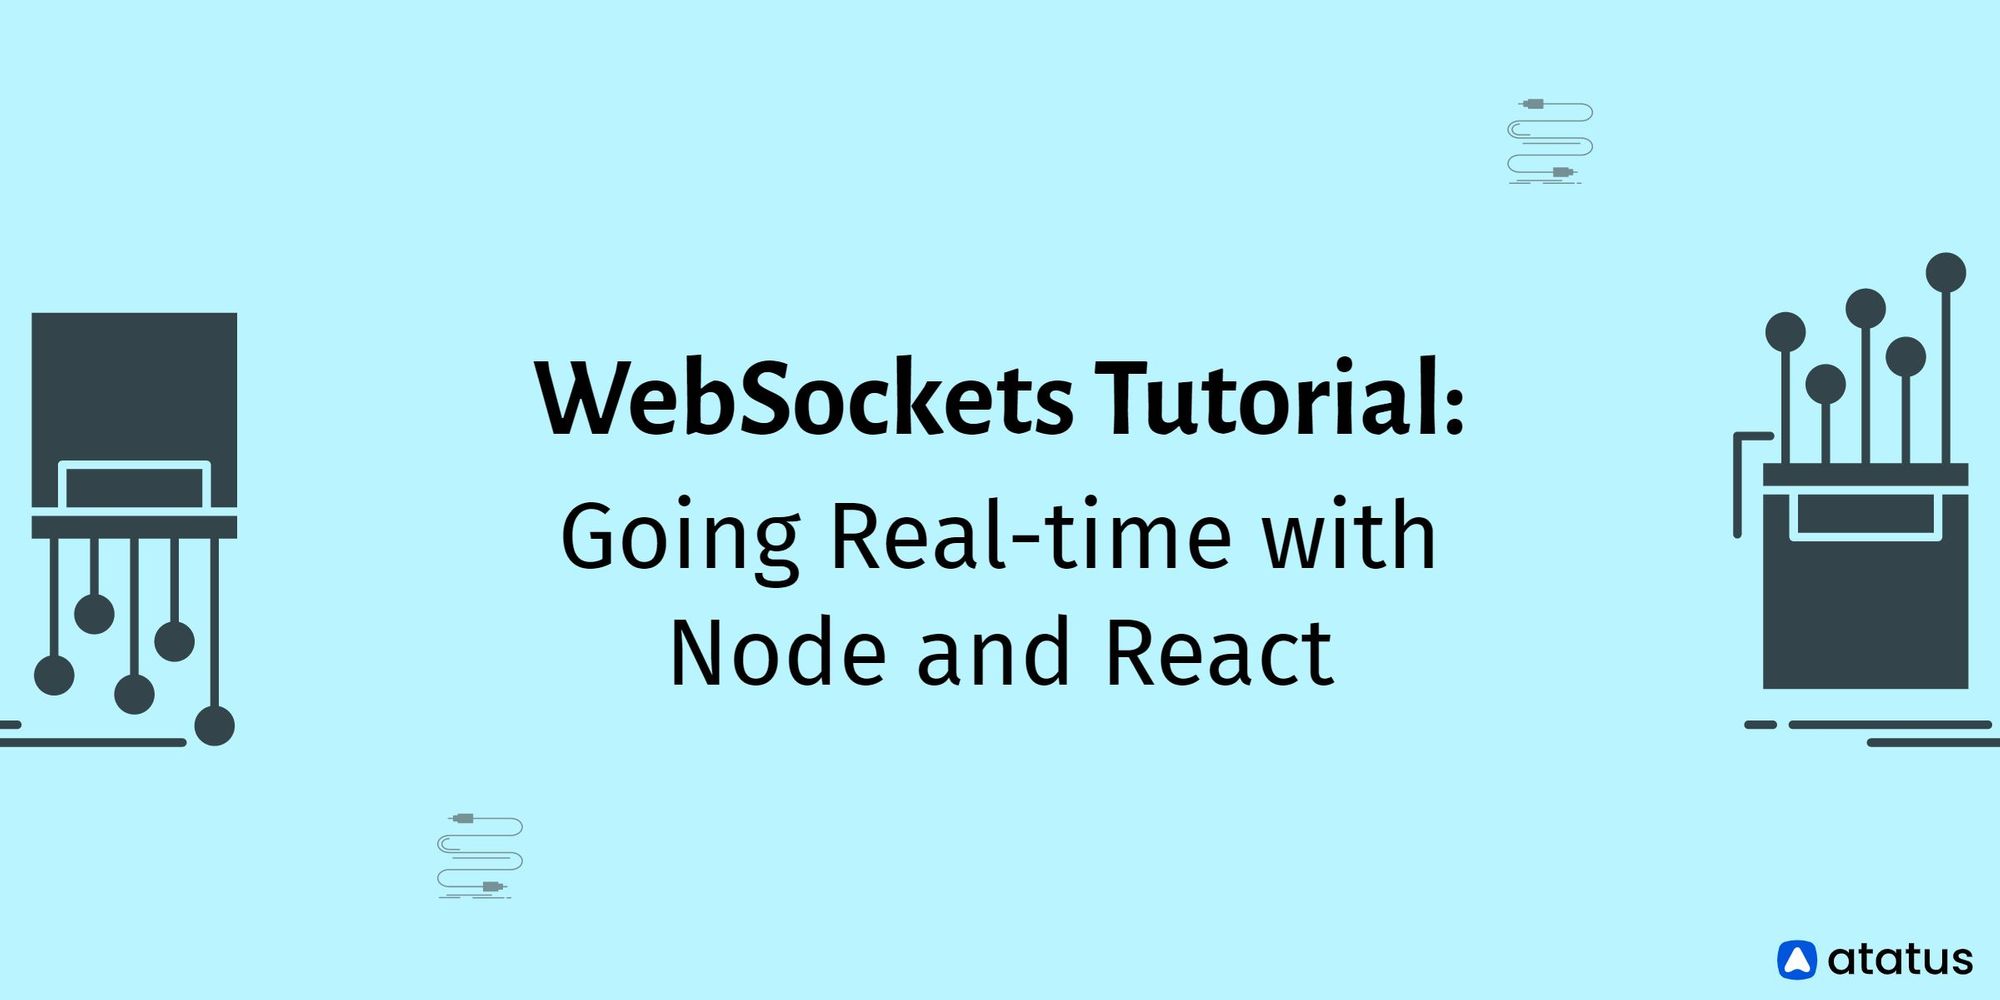 WebSockets Tutorial: Going Real-time and React